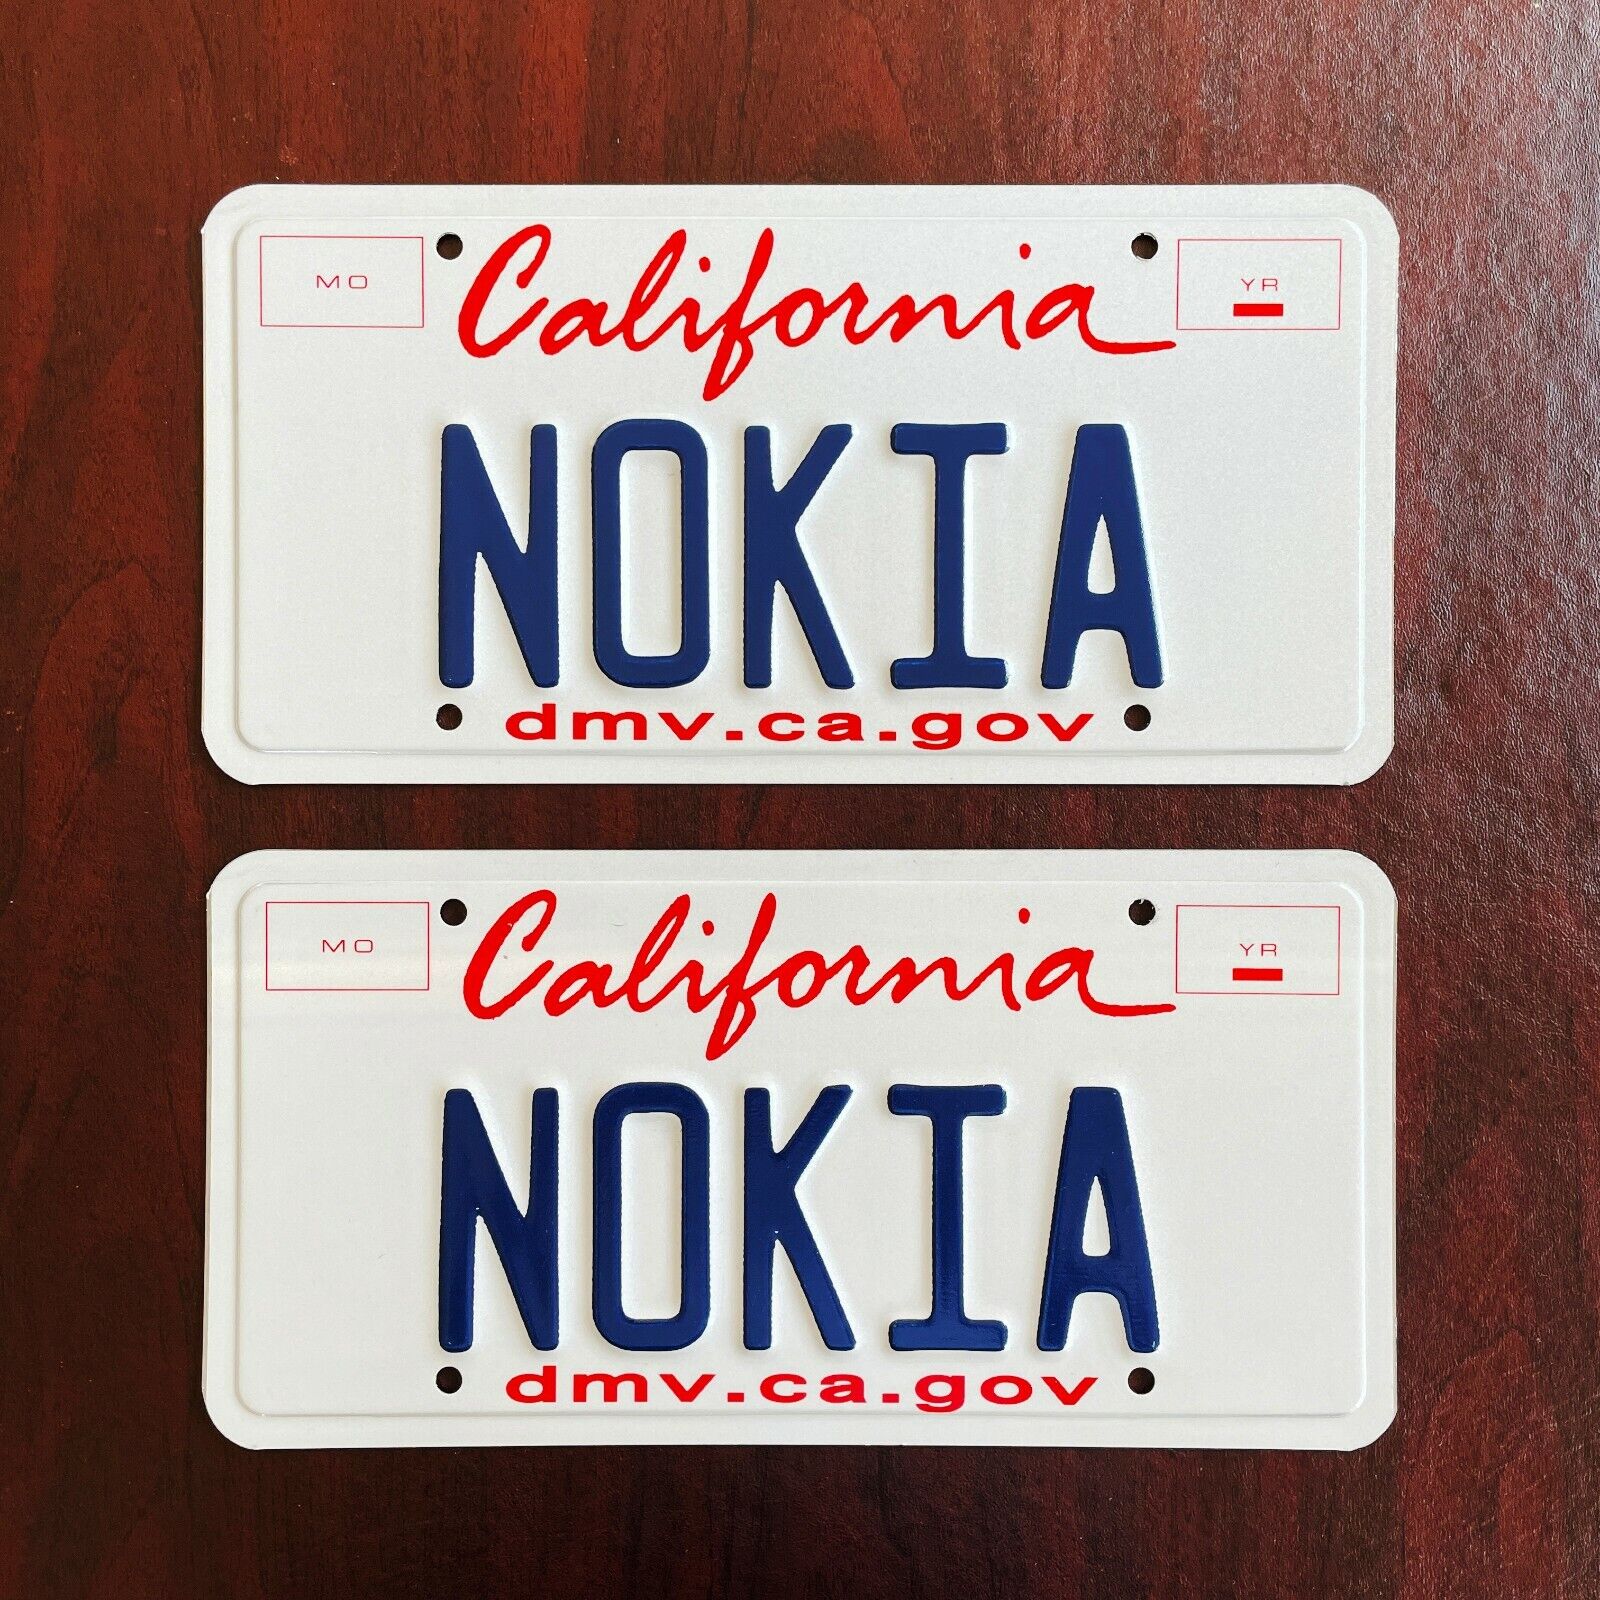 REAL California NOKIA Registered Vanity License Plates PAIR '90s Cell Phone 